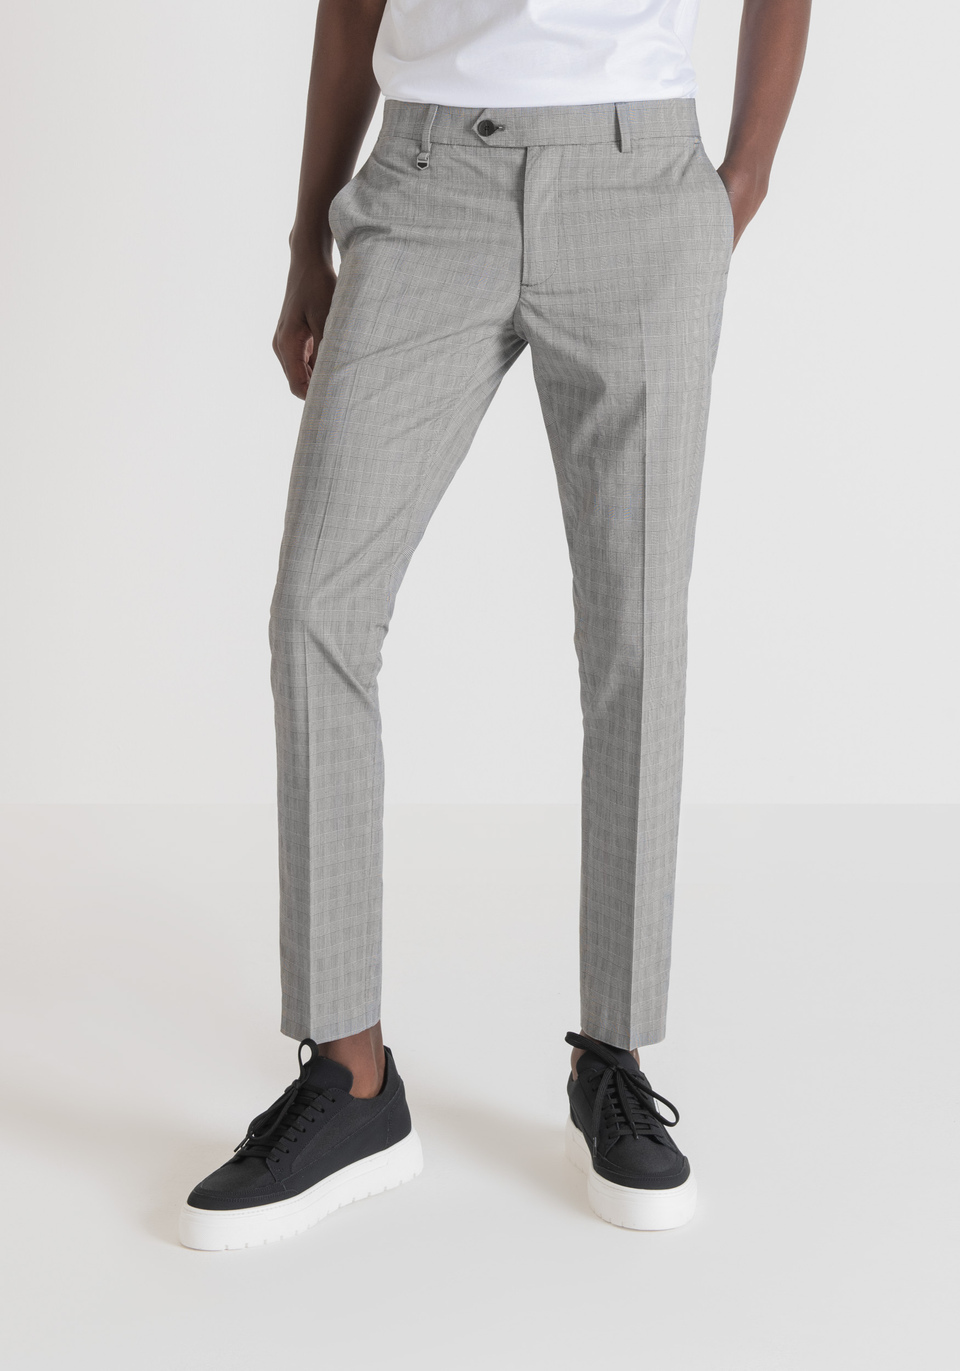 SKINNY-FIT “BRYAN” TROUSERS IN A STRETCHY COTTON YARN-DYED BLEND WITH A MICRO-WEAVE EFFECT - Antony Morato Online Shop